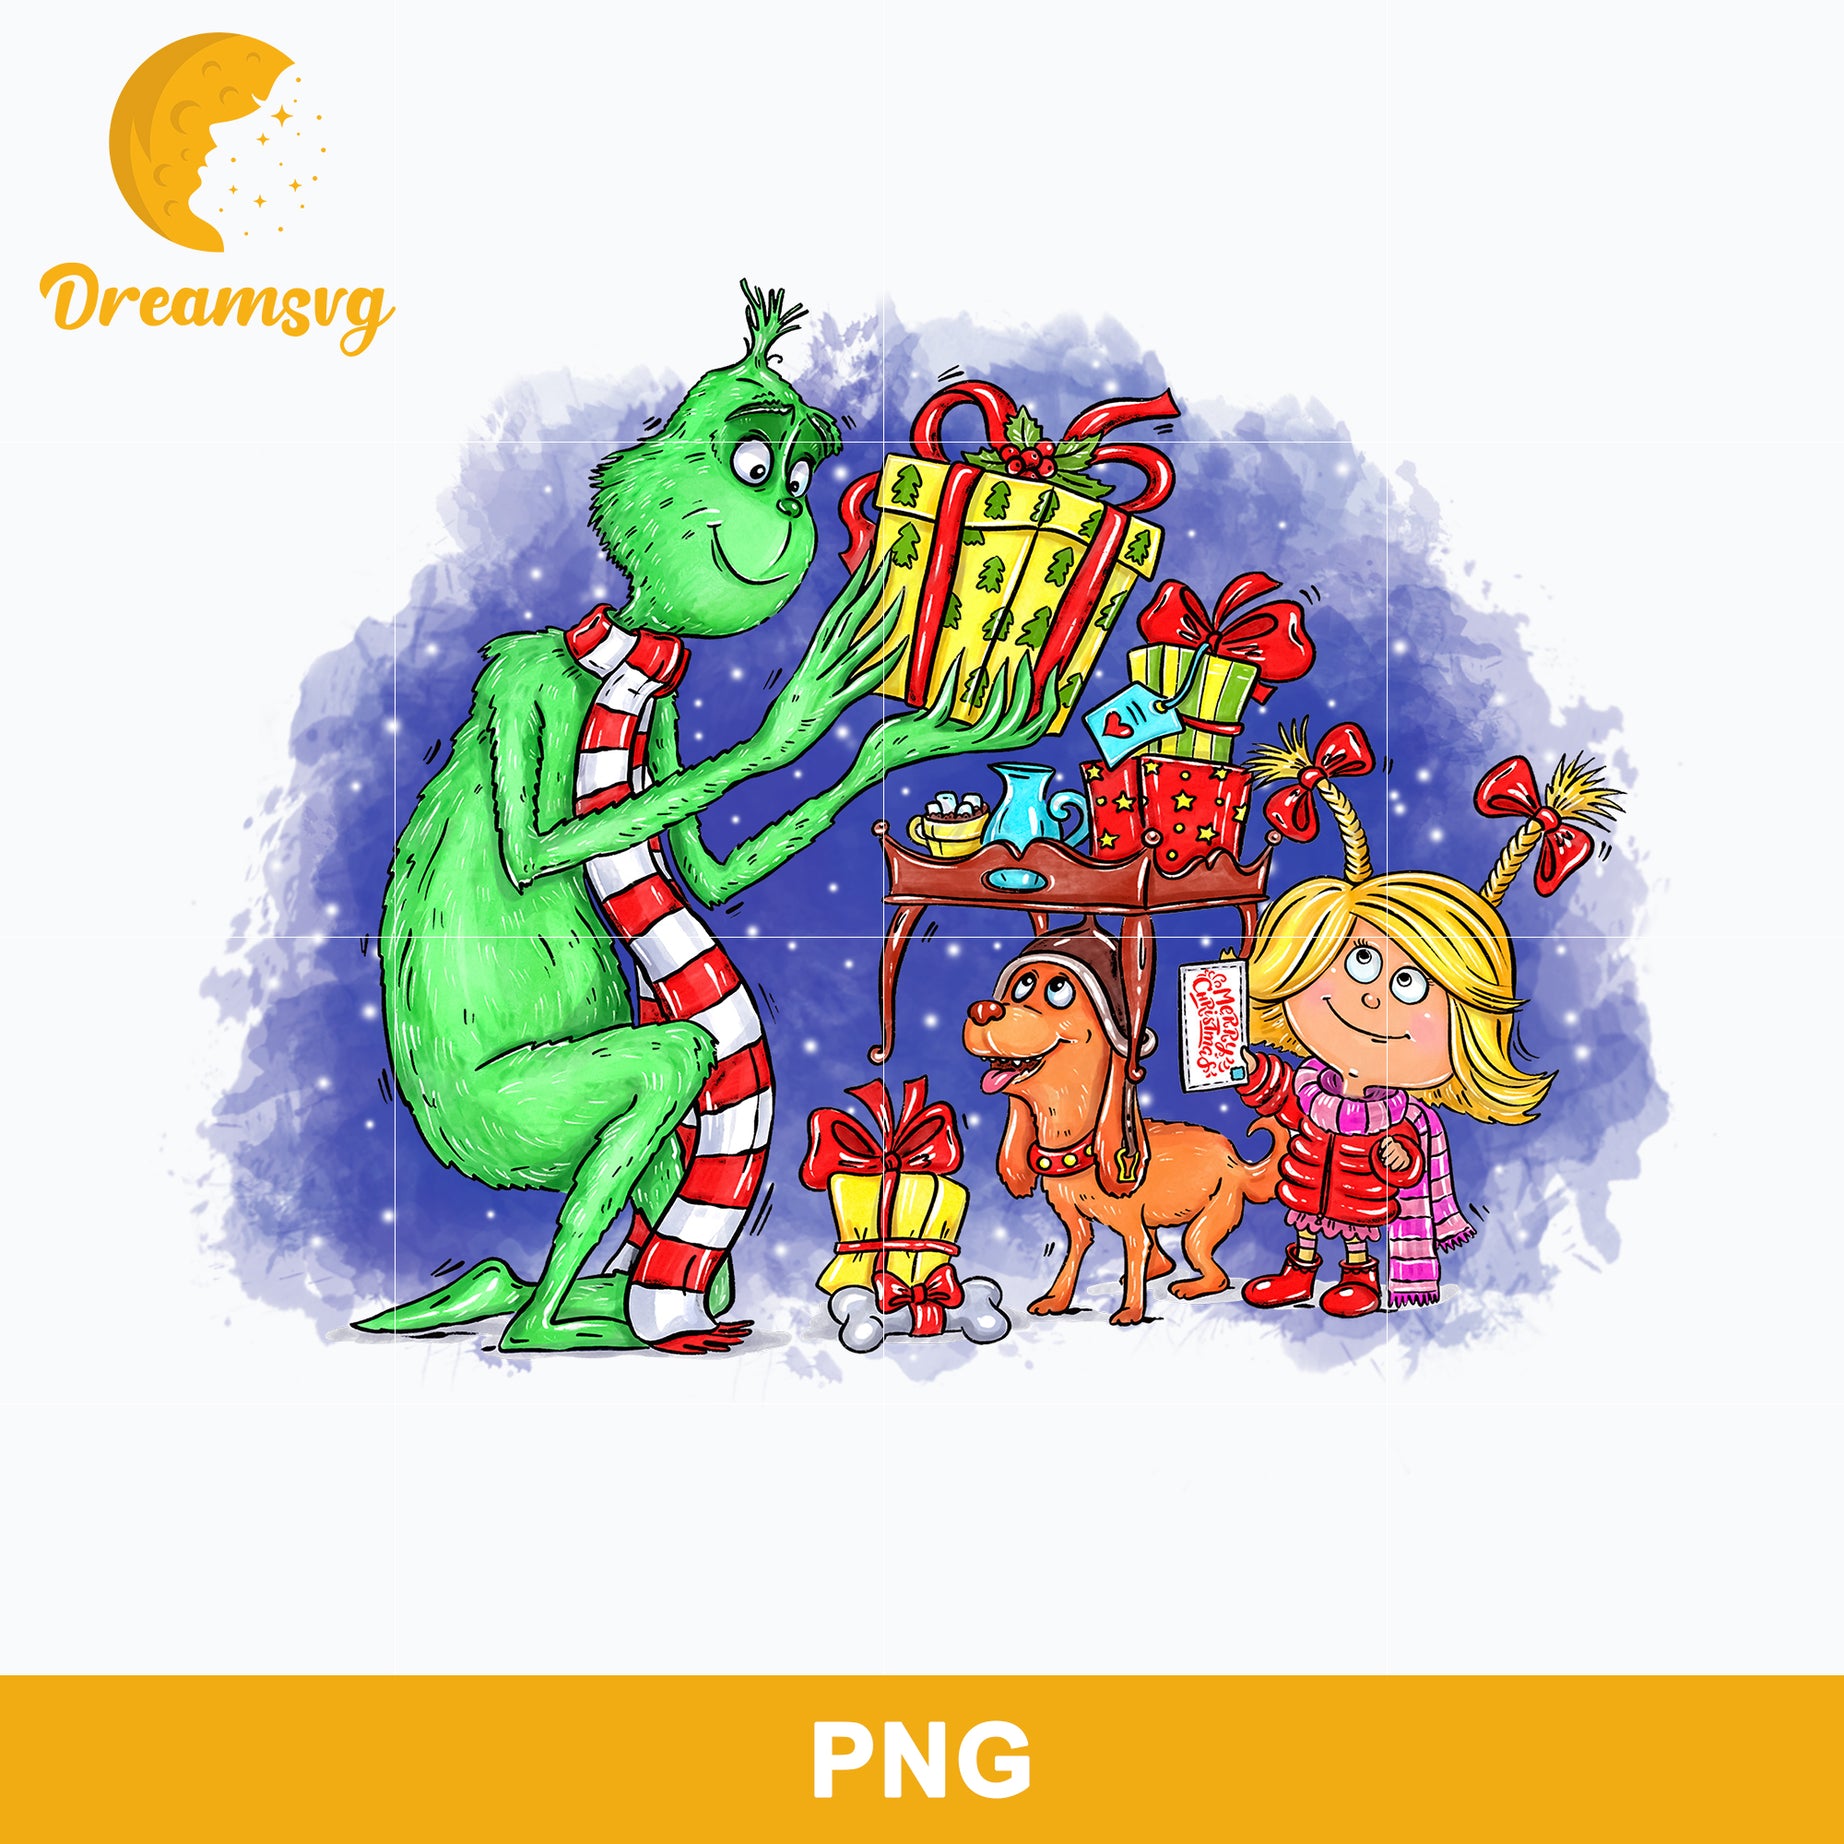 The Grinch Cindy Lou Who Max Christmas Gift PNG, Grinch Christmas PNG